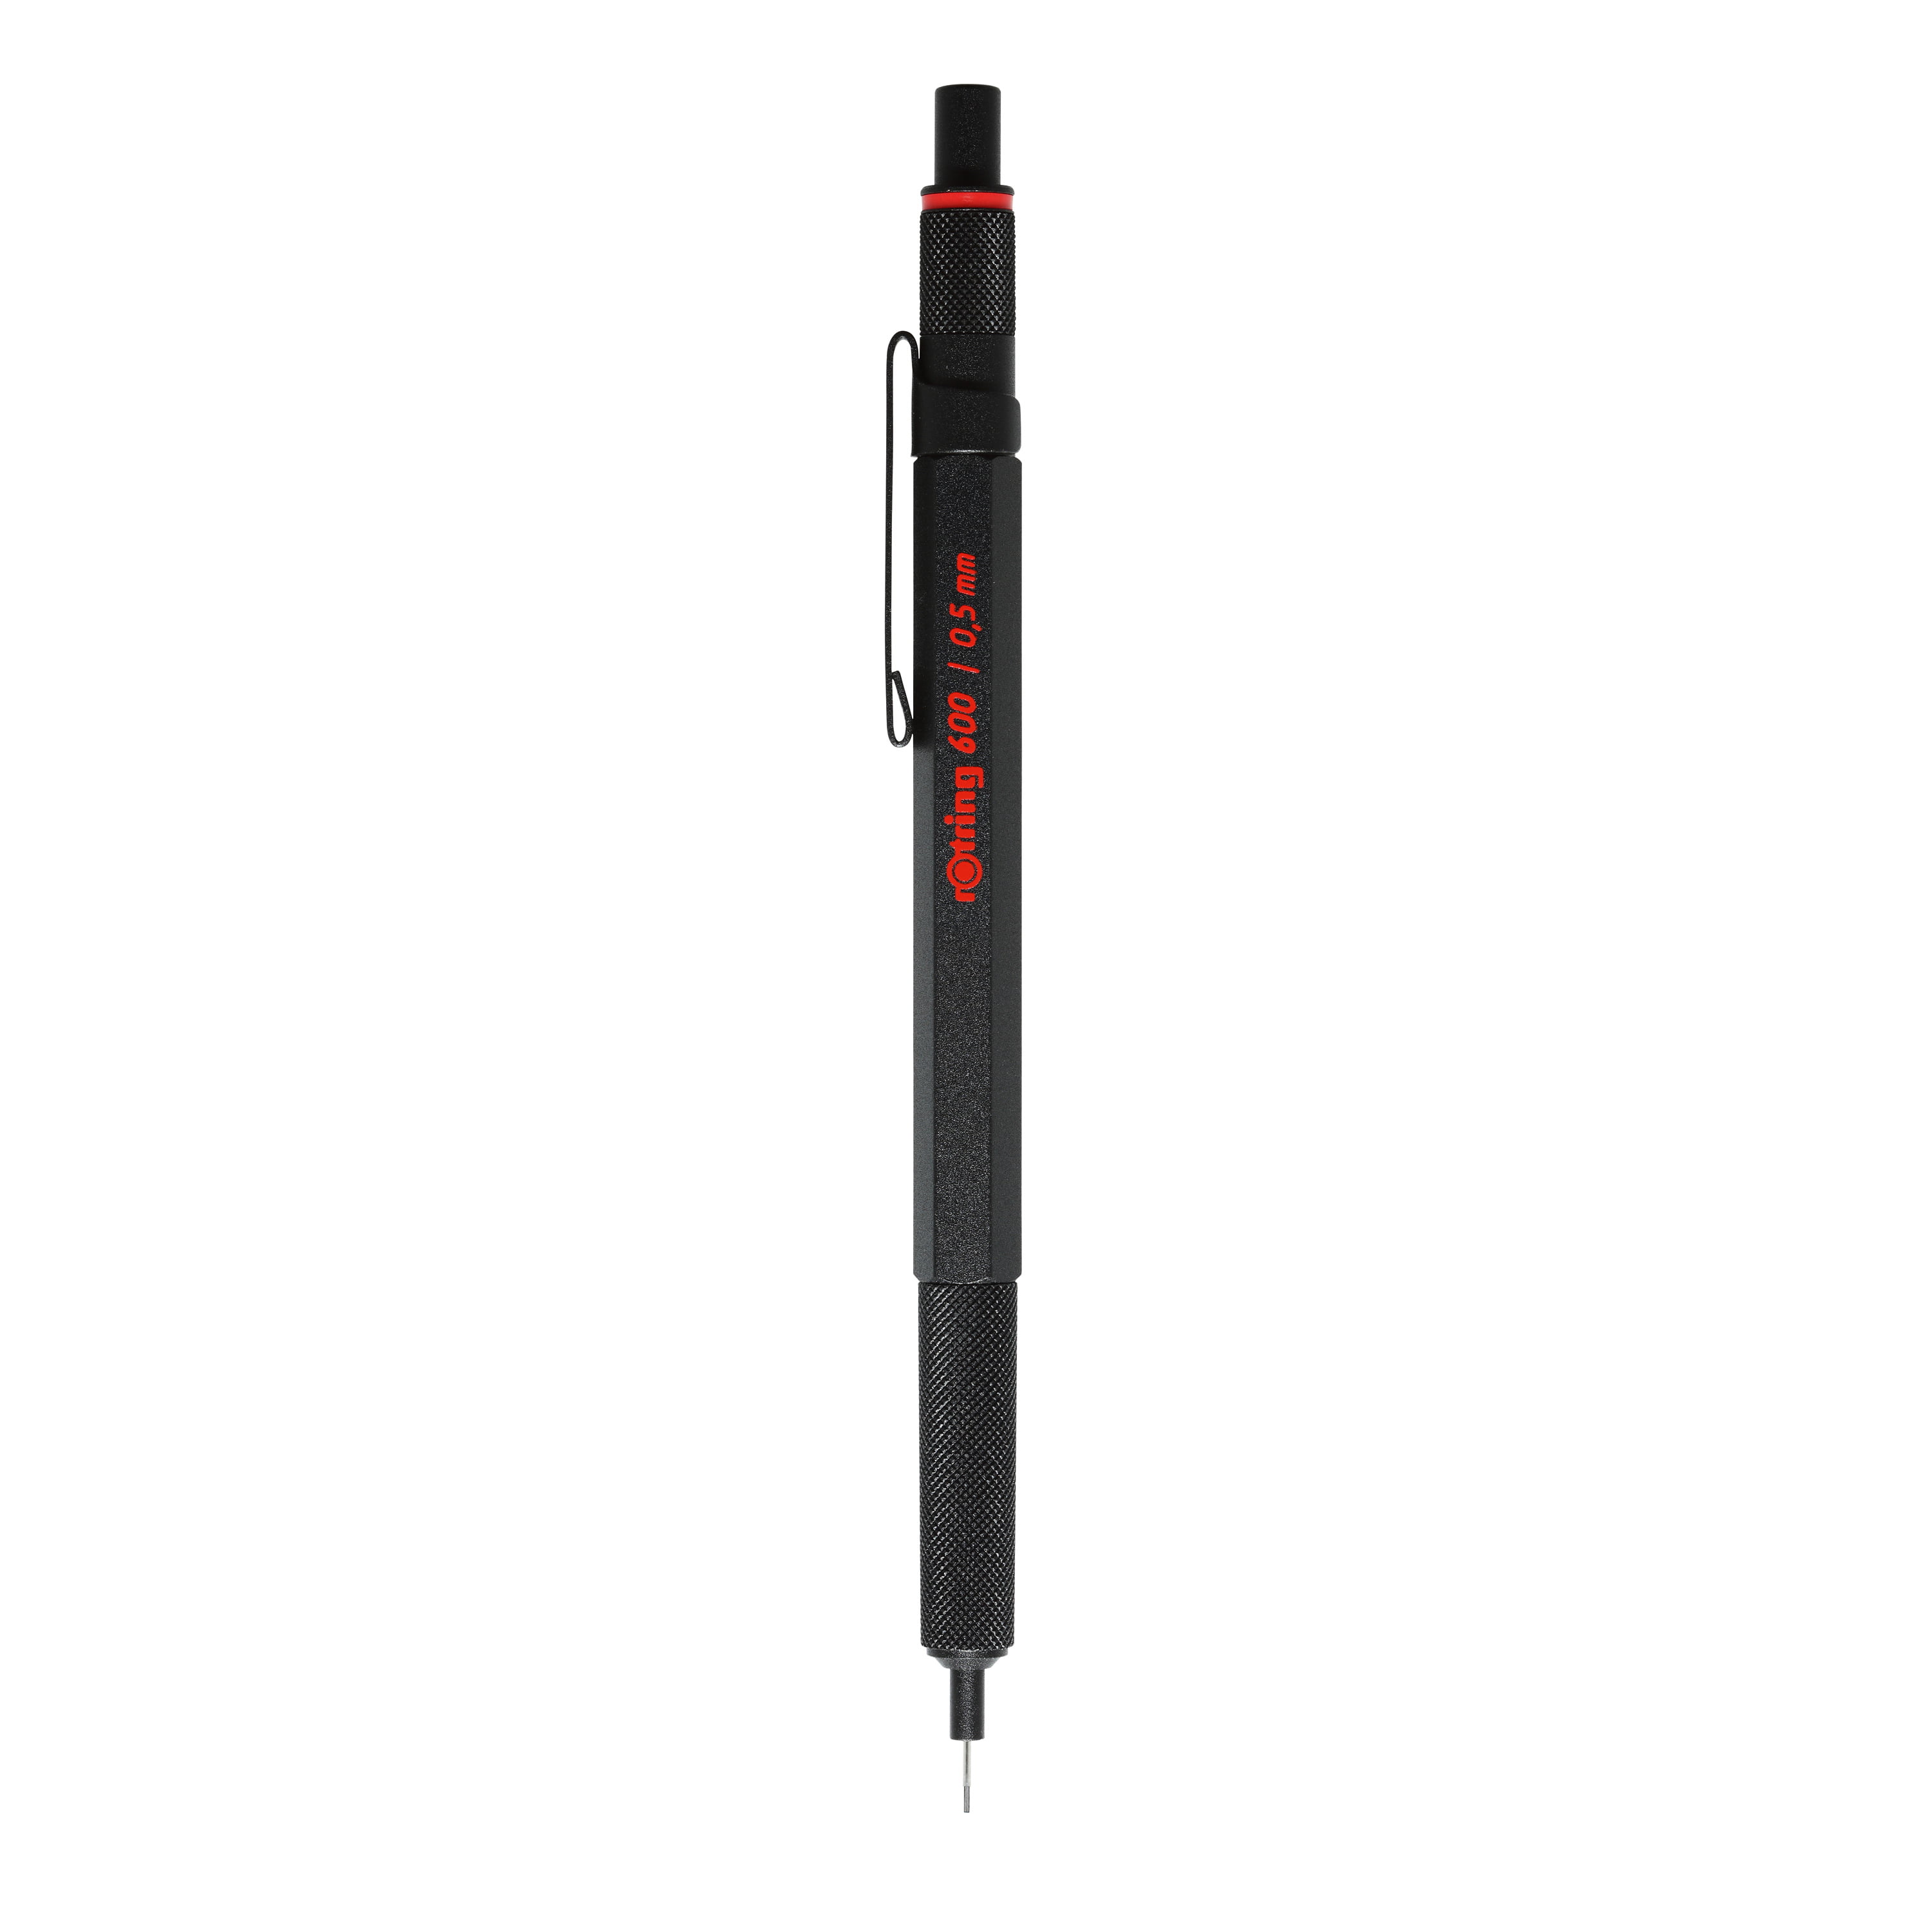 Rotring  Old 600 Black Knurled Grip  0.7 mm Pencil Only 0.7  In Red New